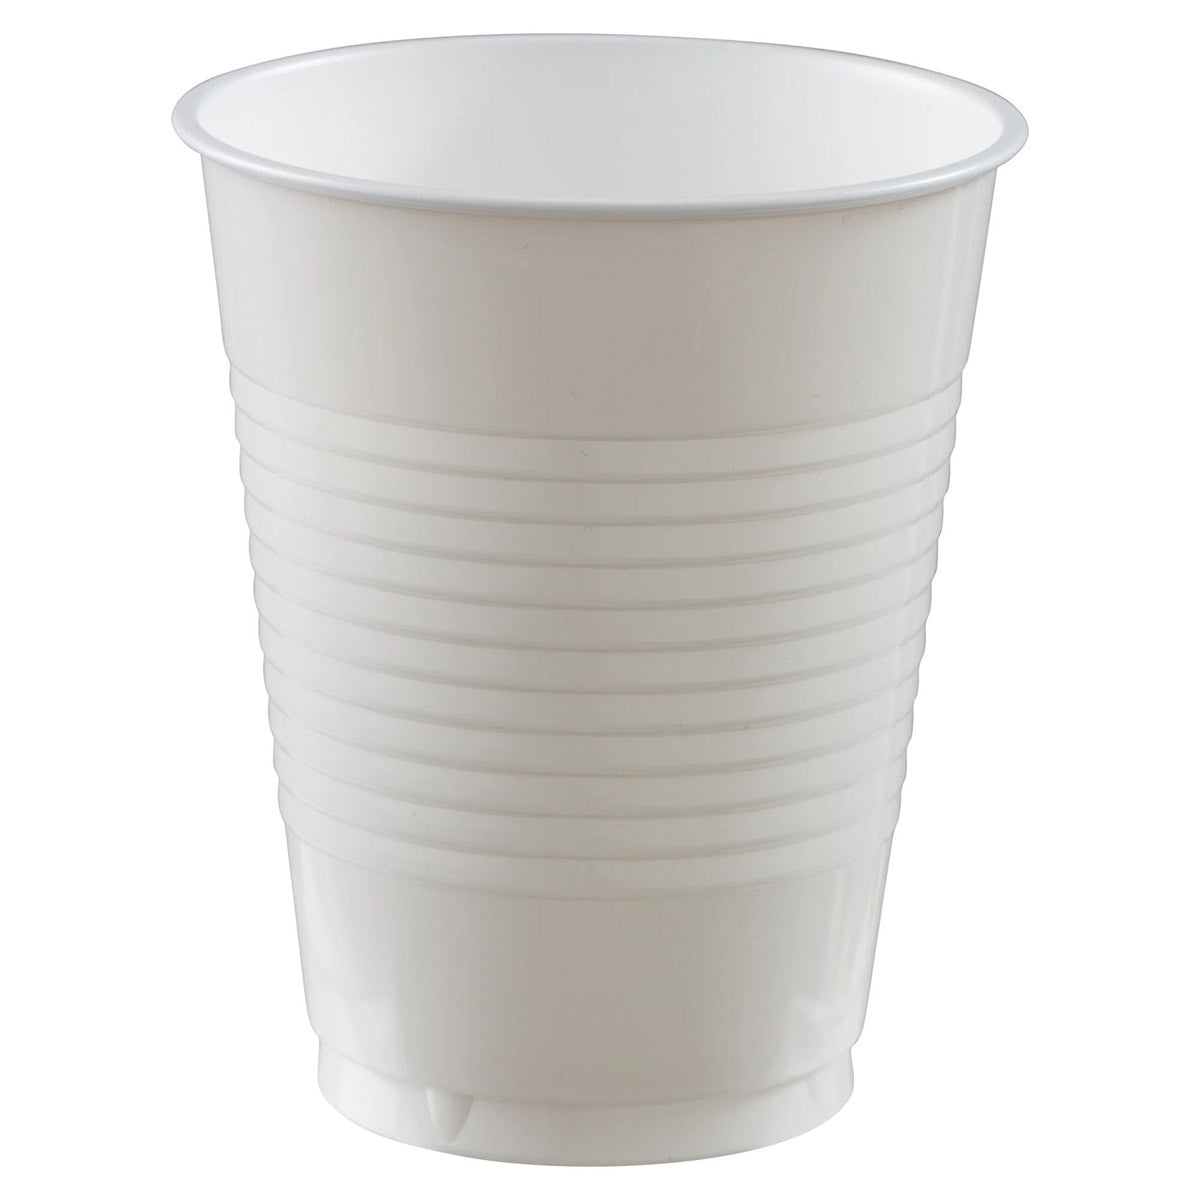 AMSCAN CA Disposable-Plasticware Frosty White Plastic Cups, 18 Oz, 50 Count